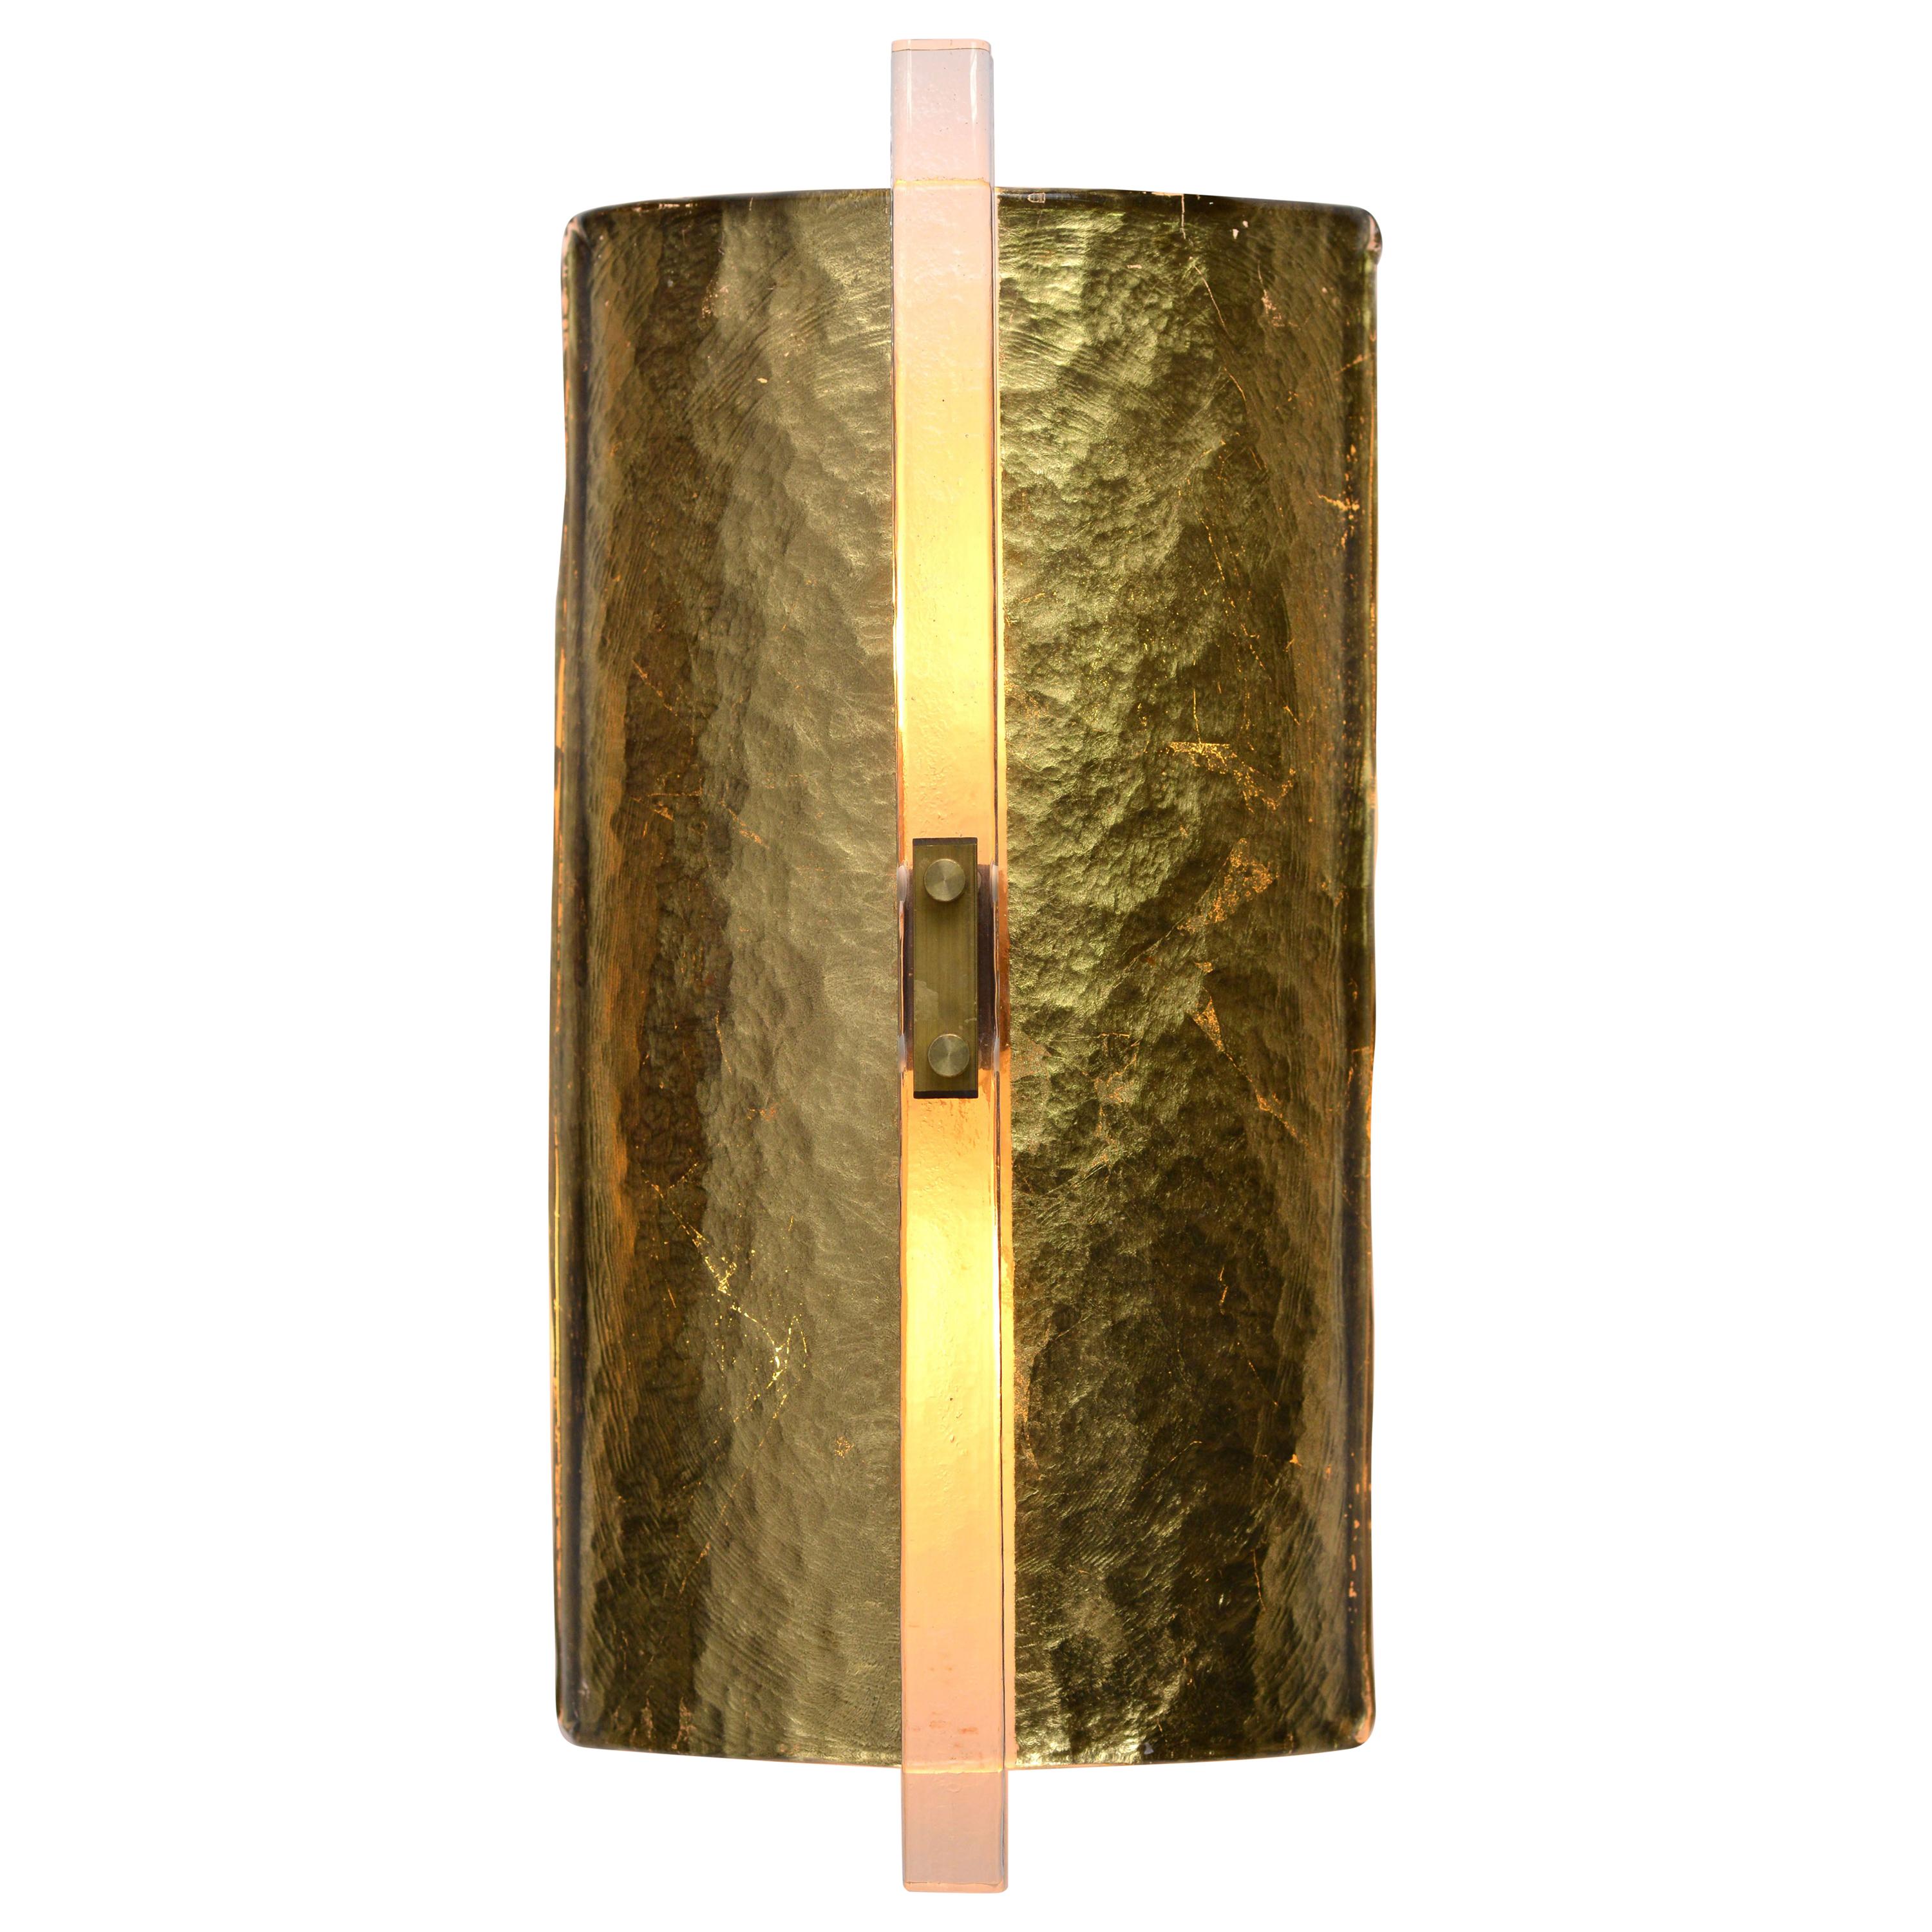 Scudo Sconce Oro, Textured Murano Glass, Gold Leaf and Brass Detailing